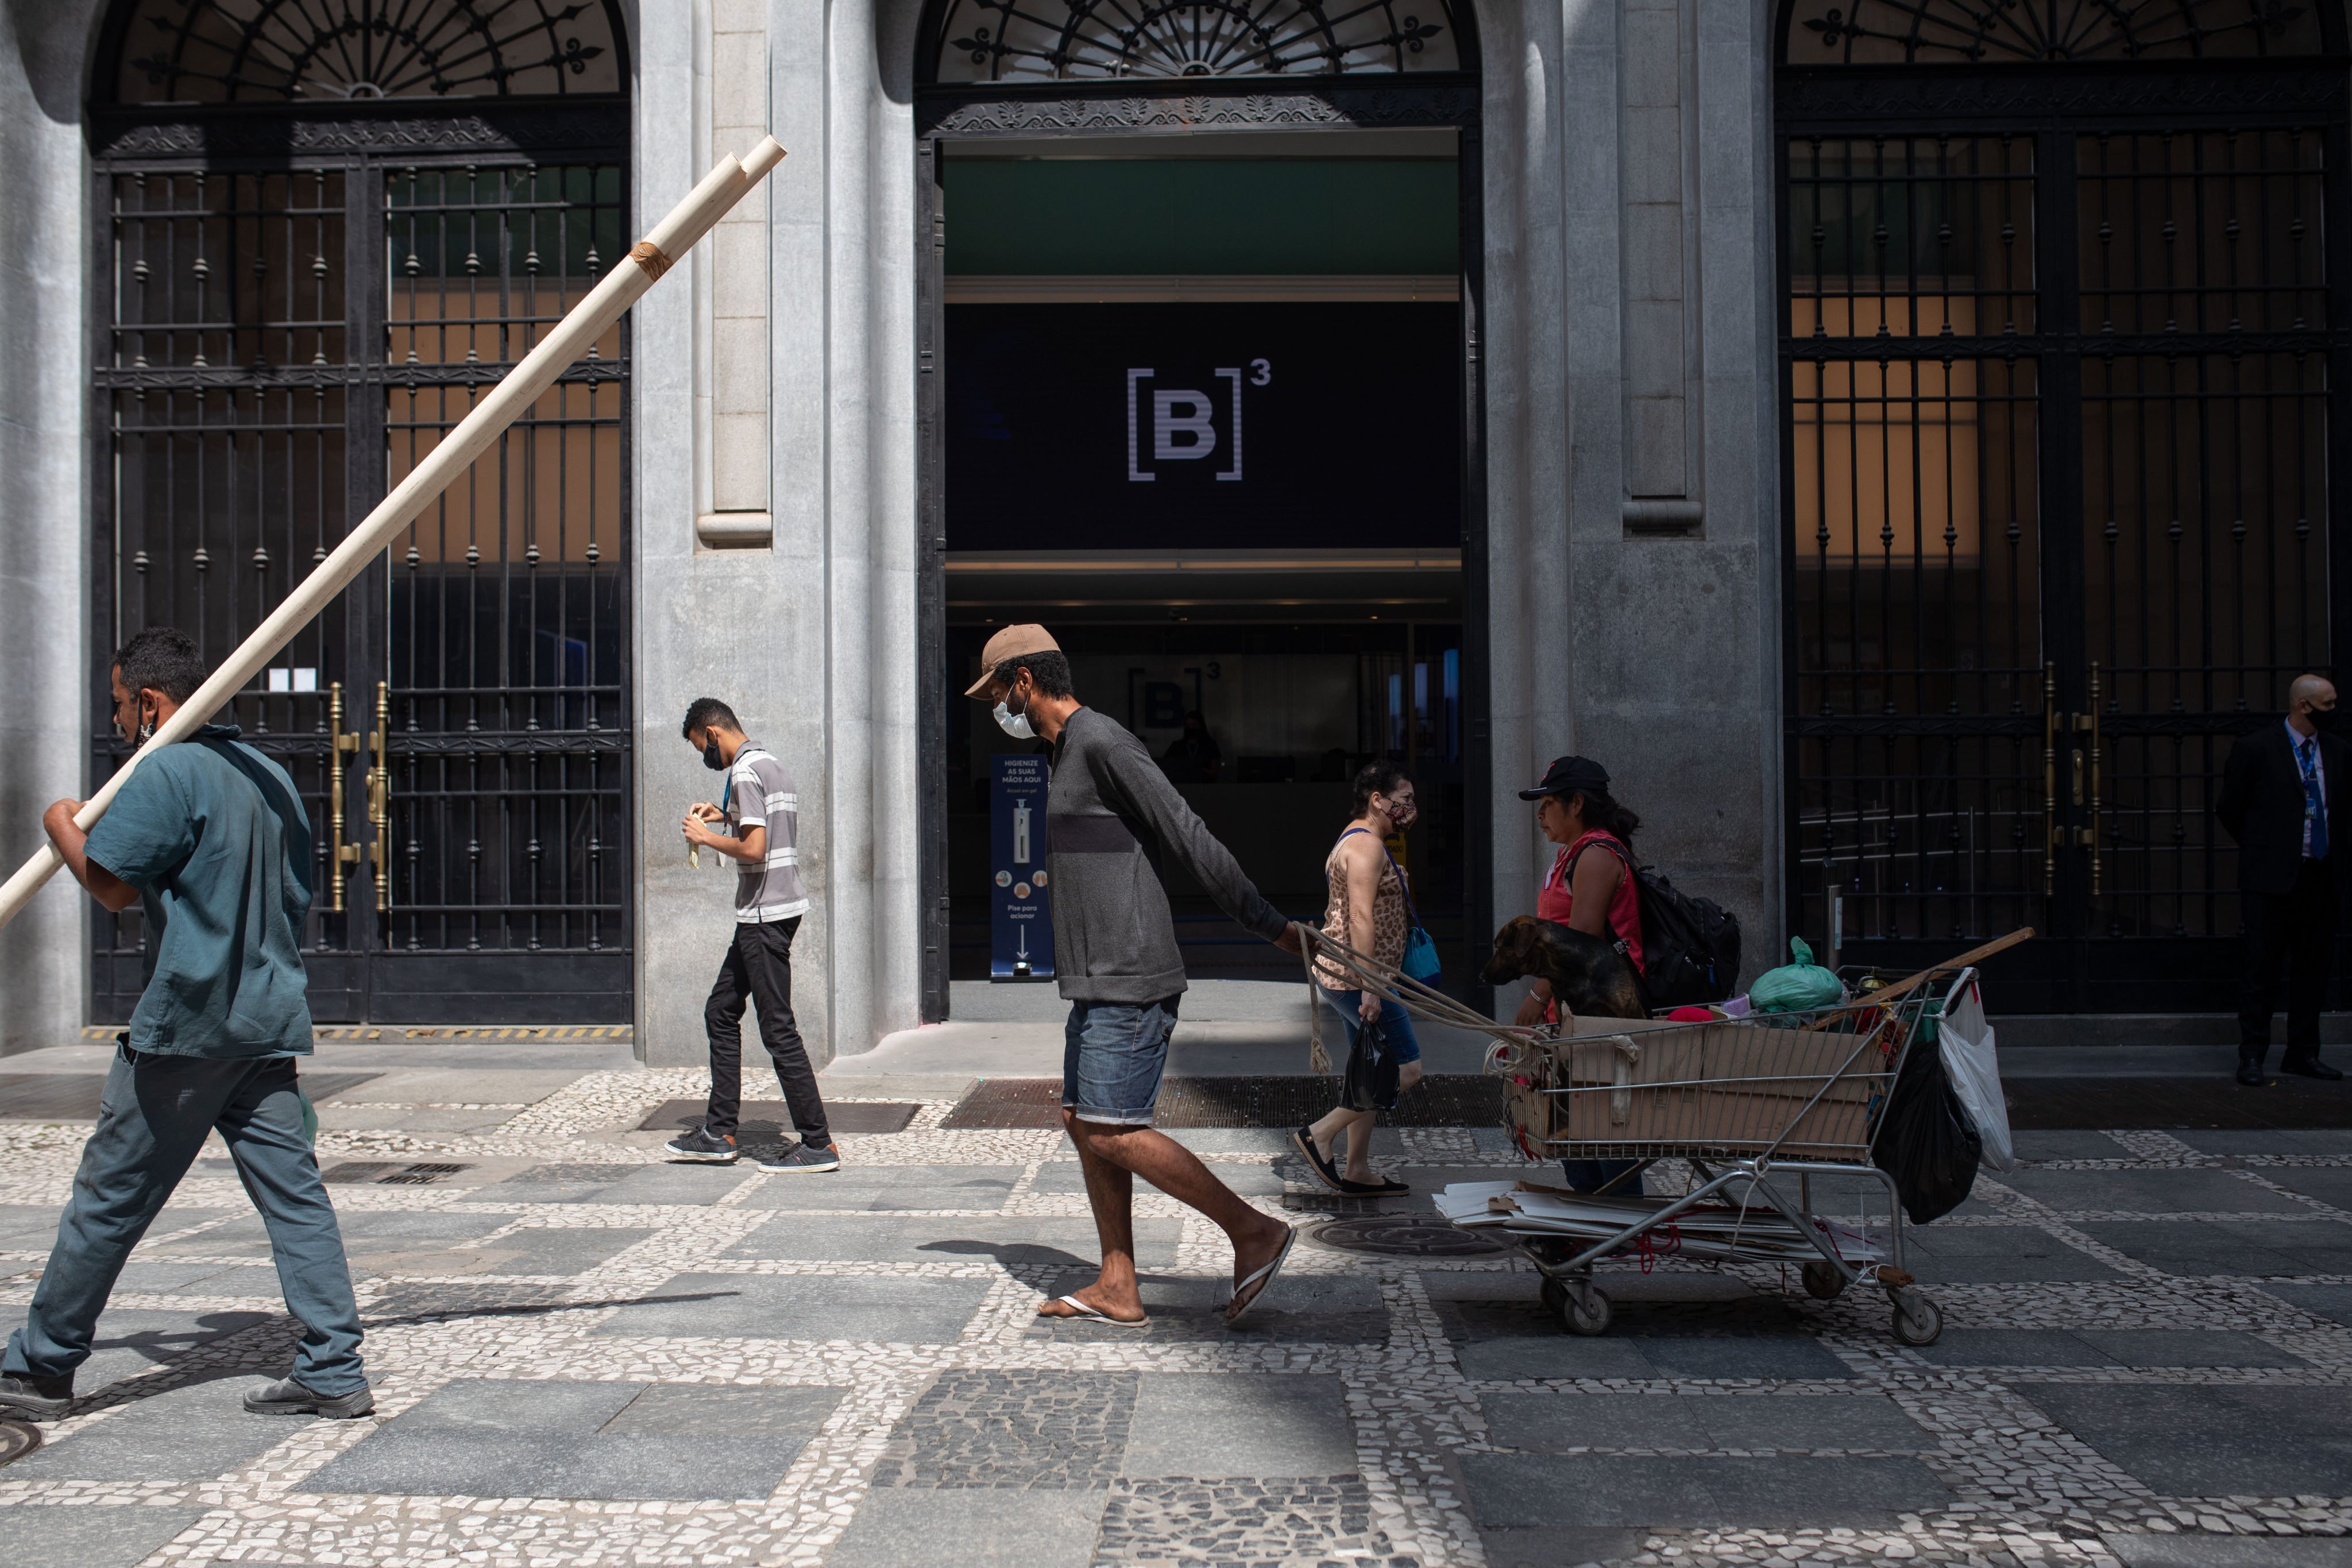 People walk past the Brasil Bolsa Balcao (B3) stock exchange in Sao Paulo, Brazil, on February 24. The Brazilian real has performed well over the past year as investors are drawn by low prices and high yields. Photo: Bloomberg